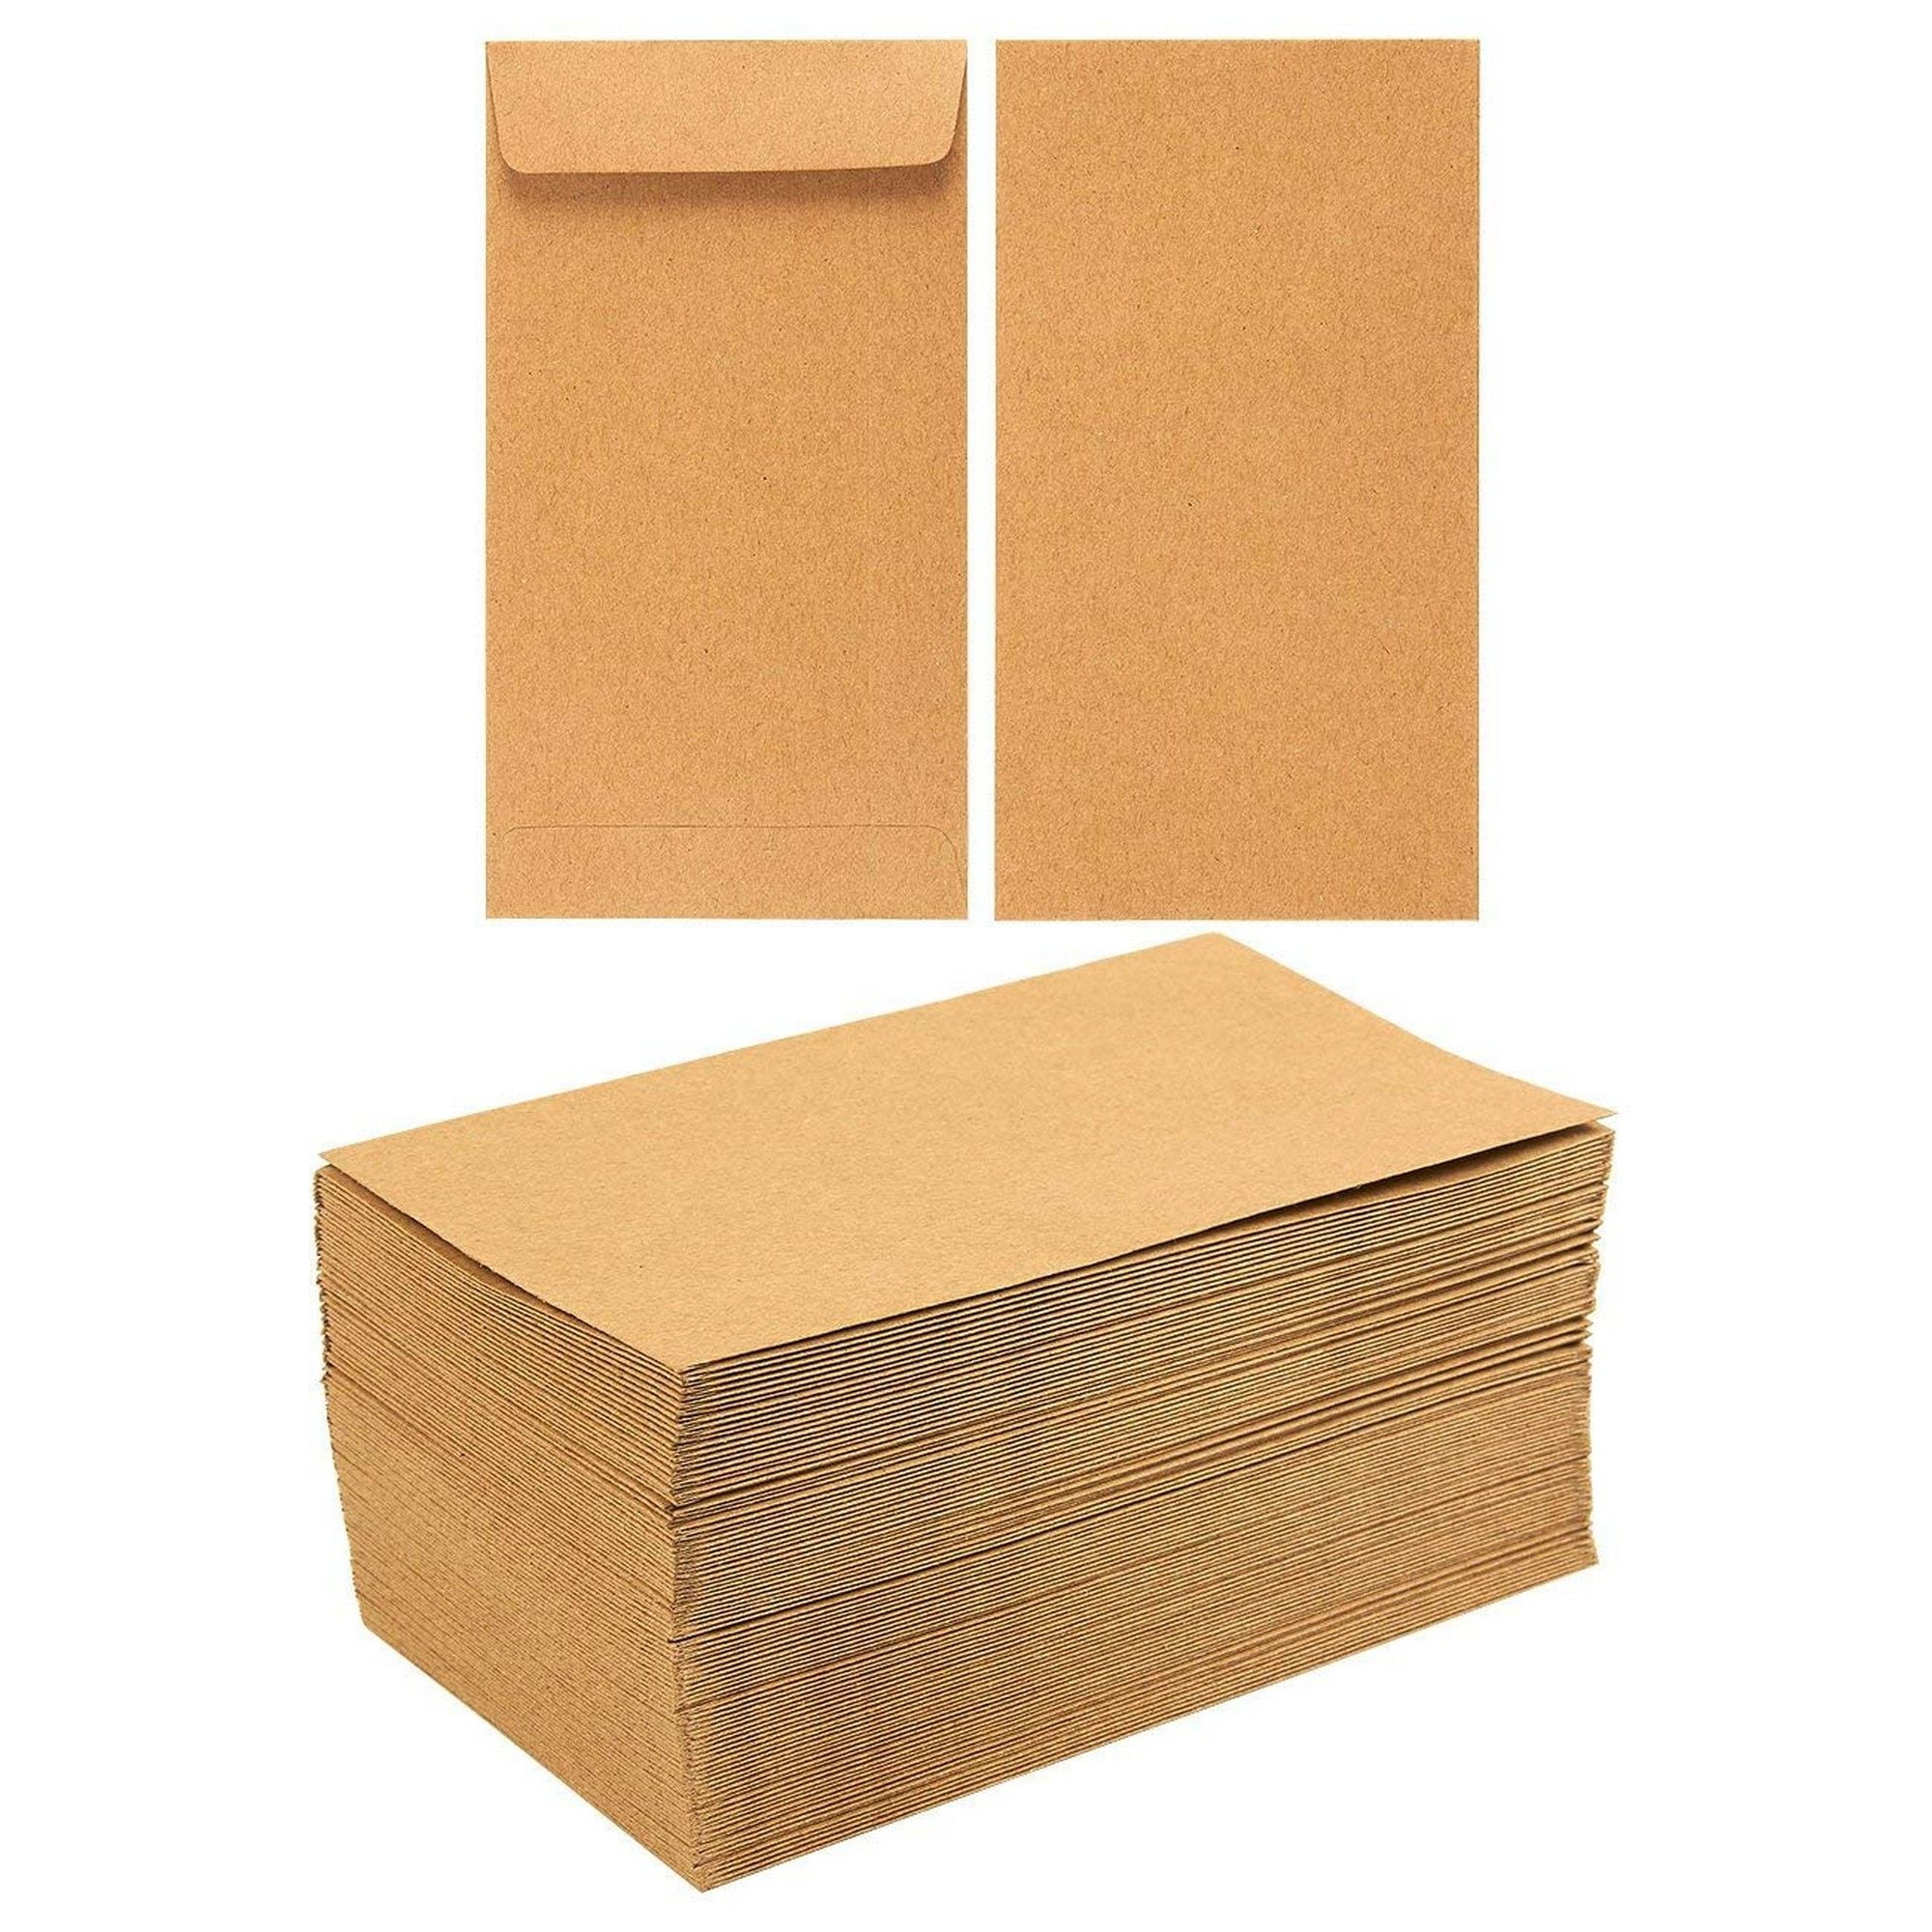 100-pack-of-coin-envelopes-small-kraft-money-envelopes-for-currency